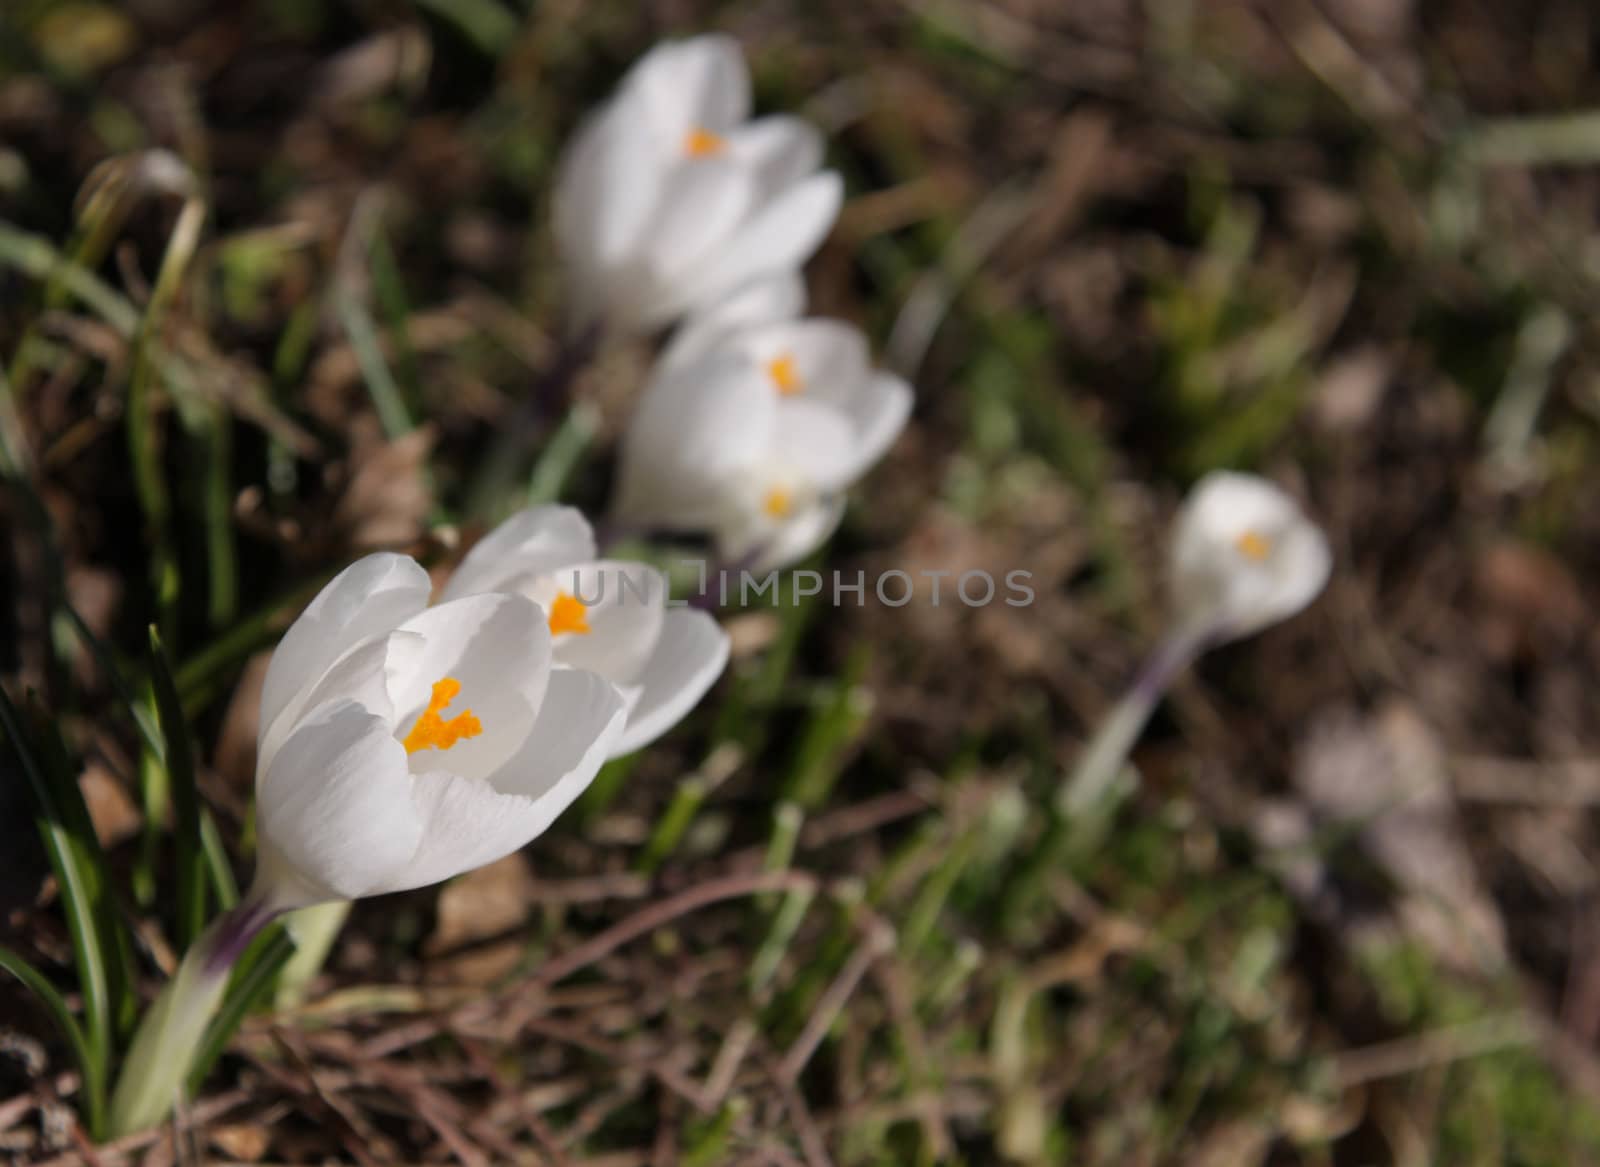 Group of White Crocuses
 by ca2hill